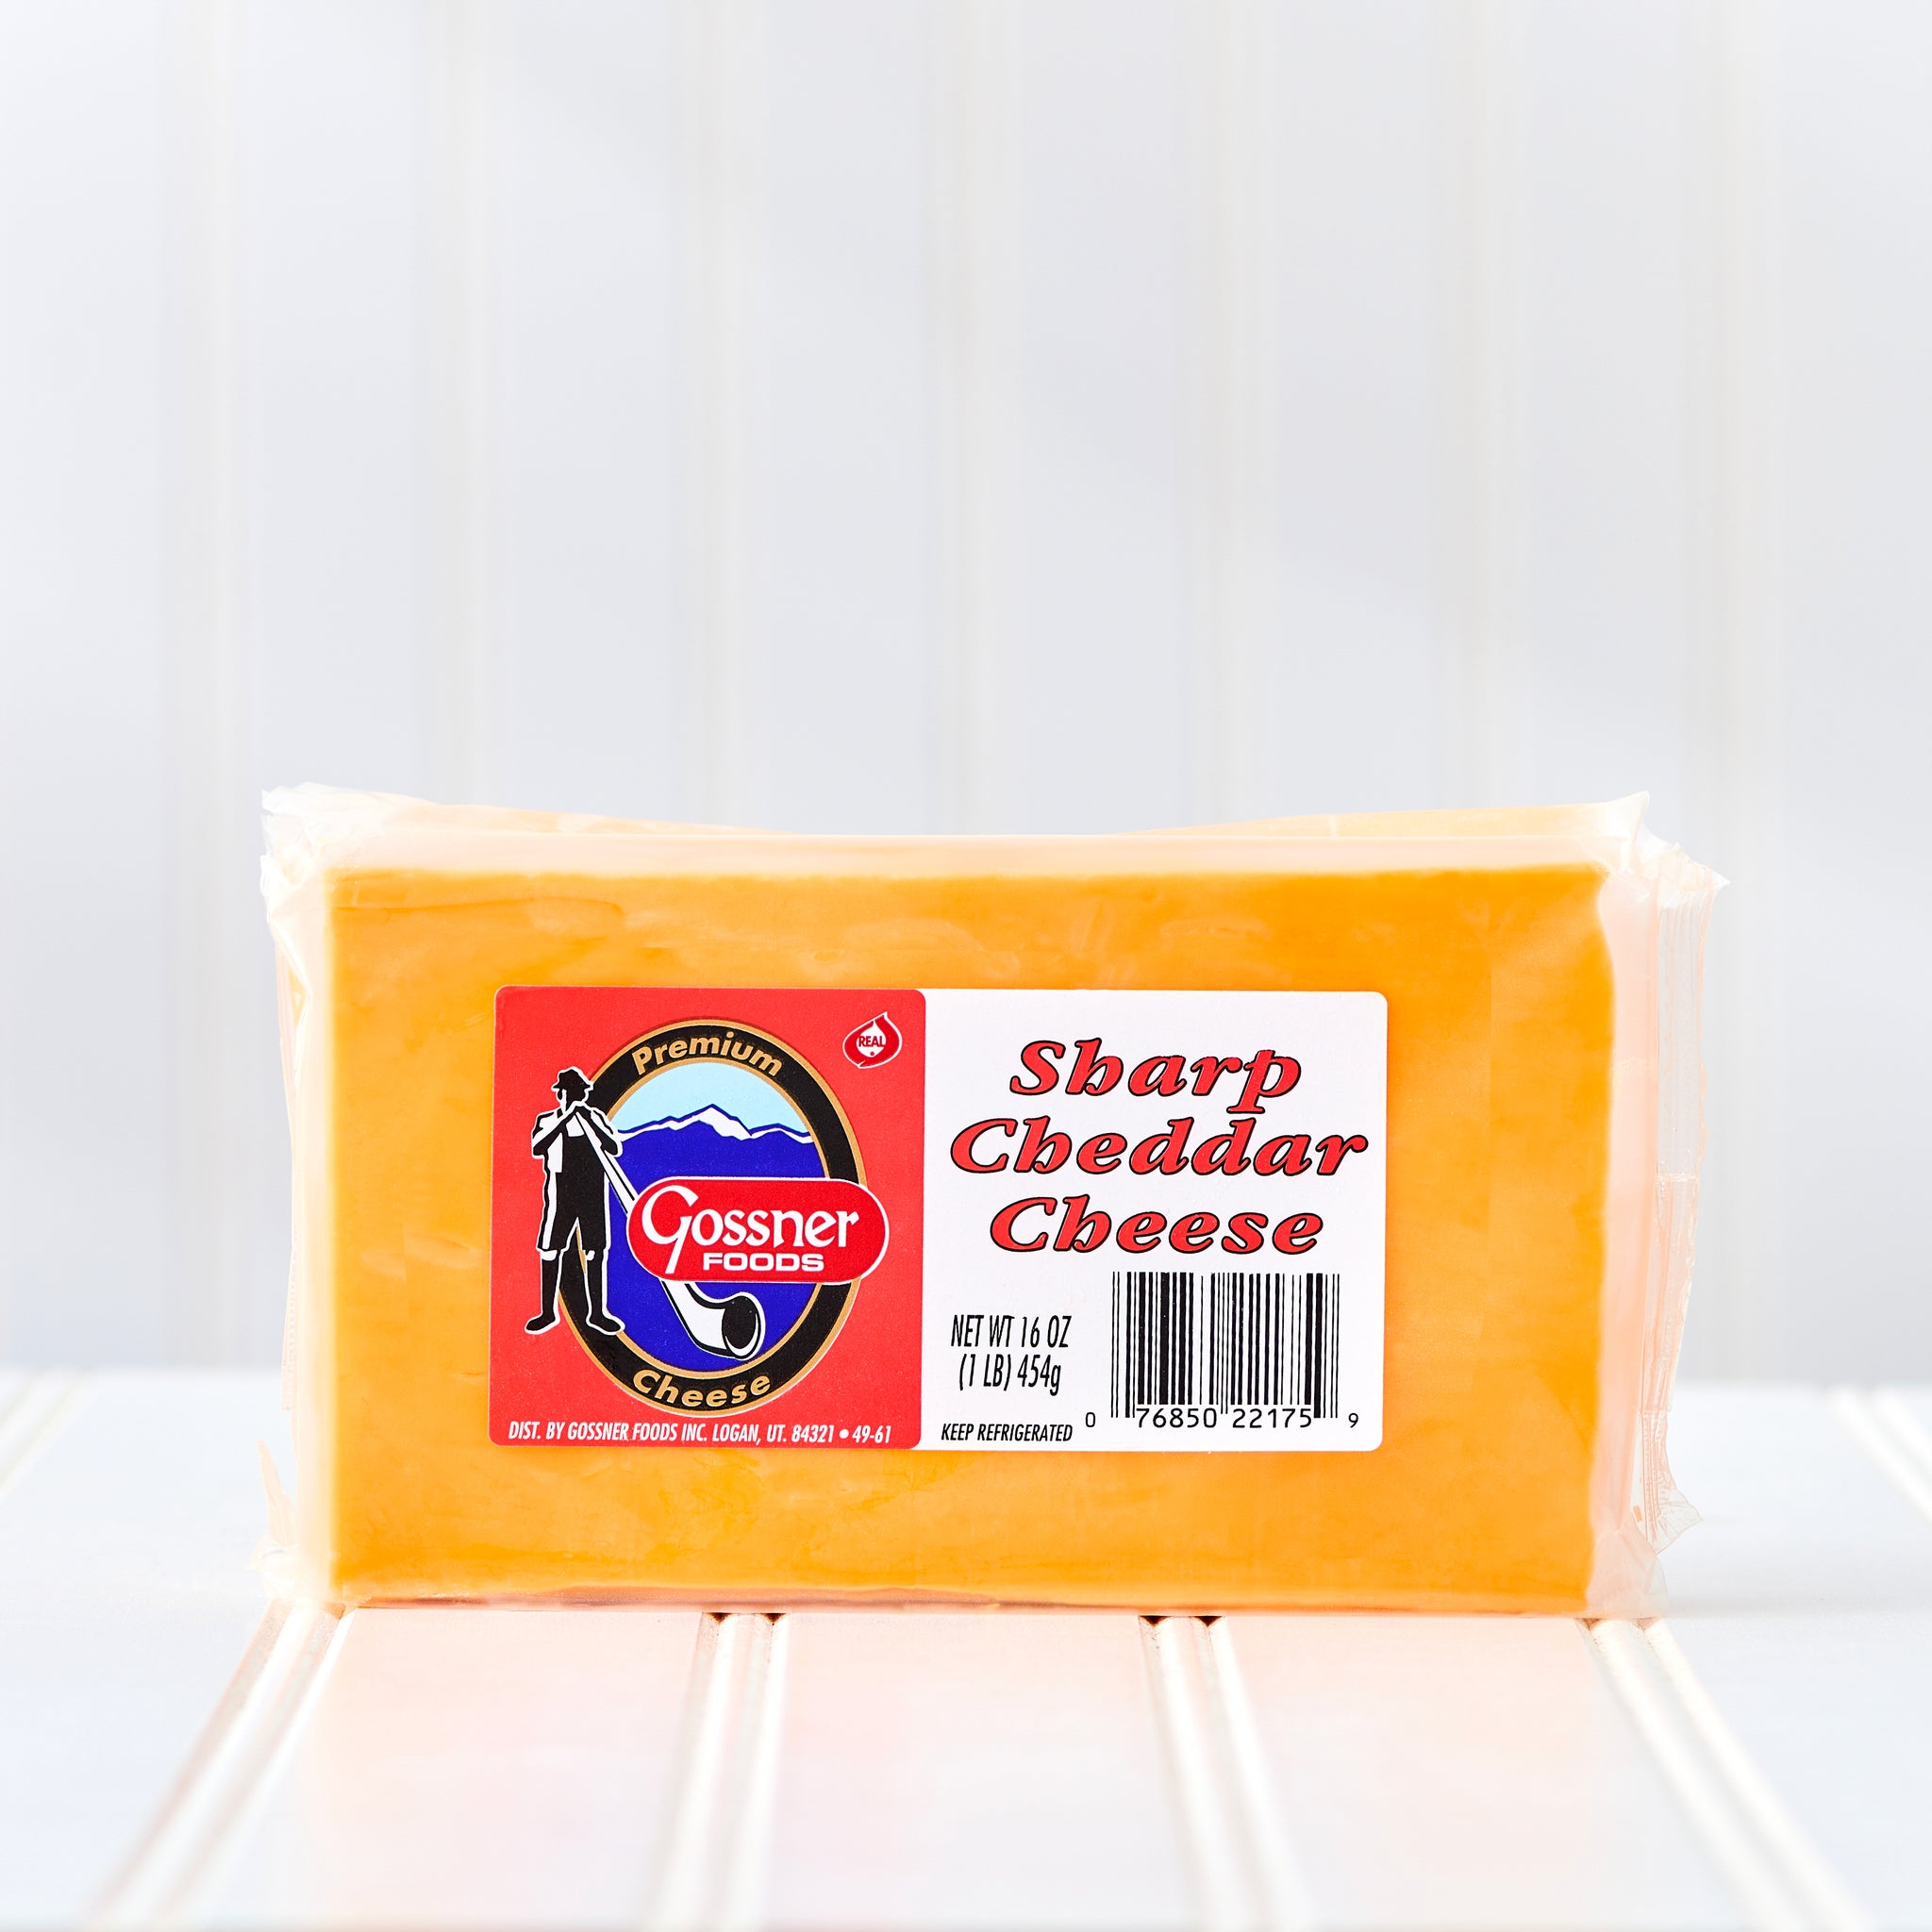 Gossner Foods® Sharp Cheddar Cheese